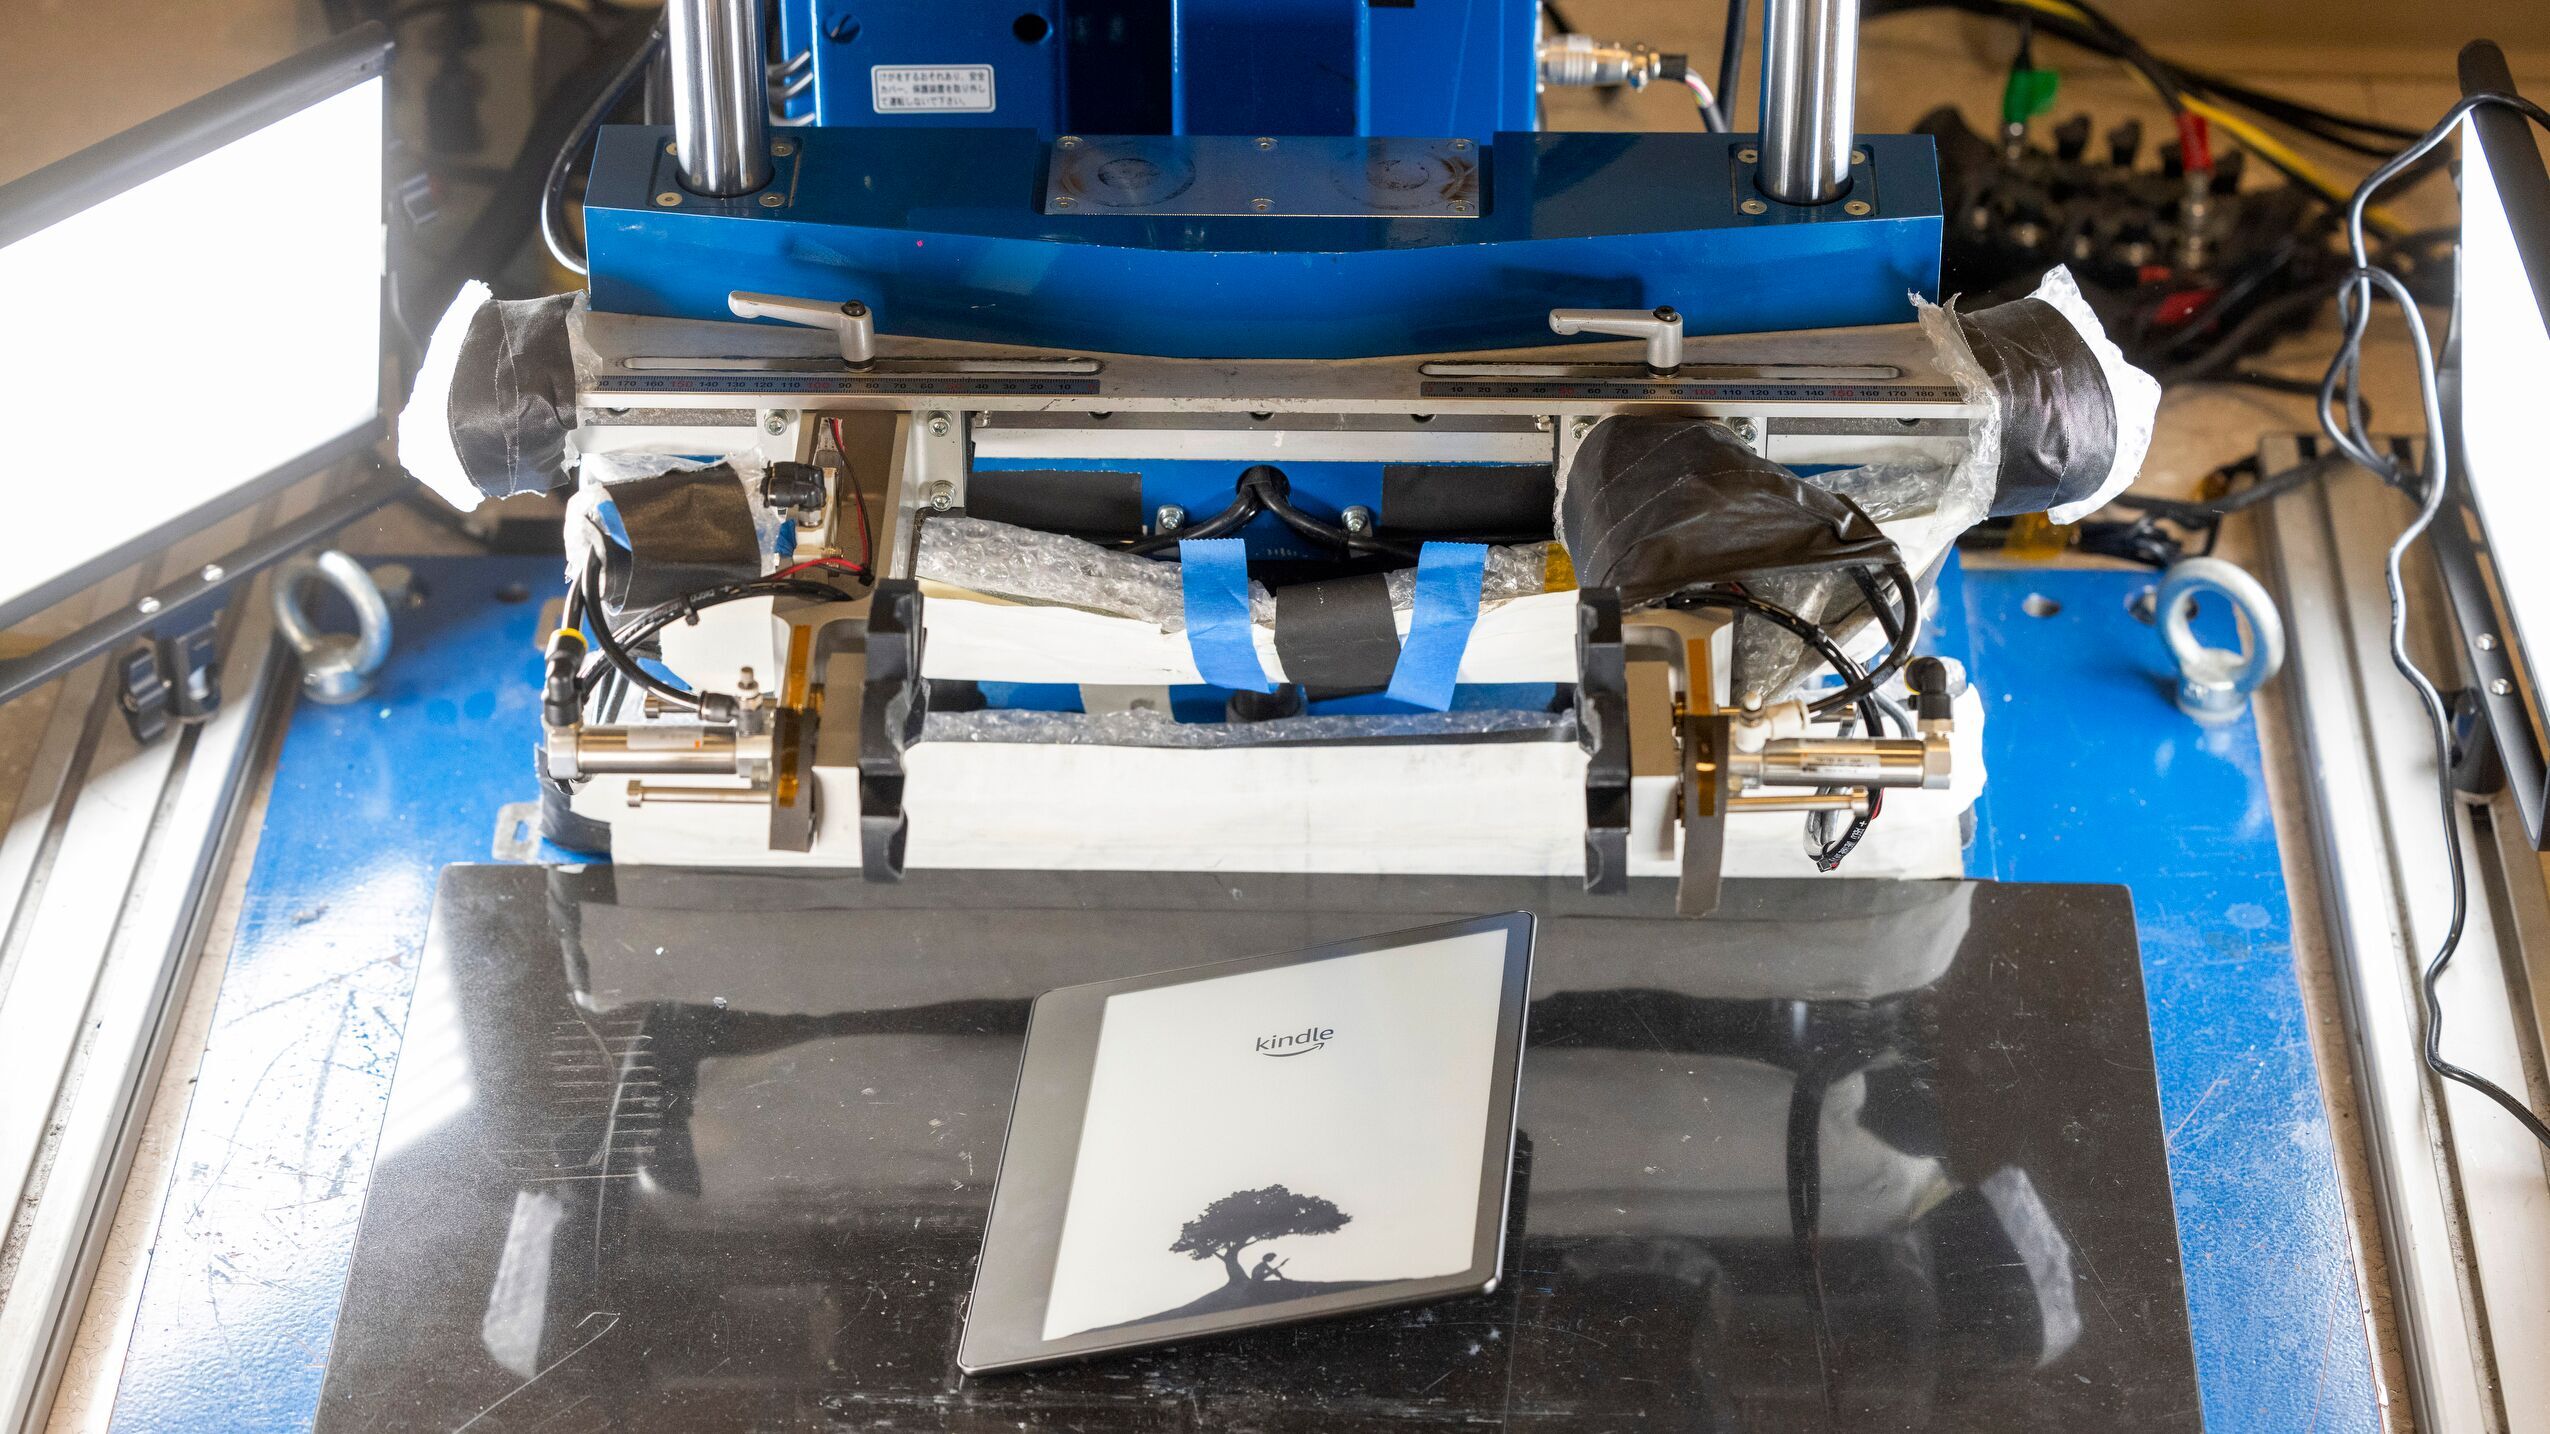 An image of a machine with two claw-like arms dropping a Kindle device onto a platform below it.